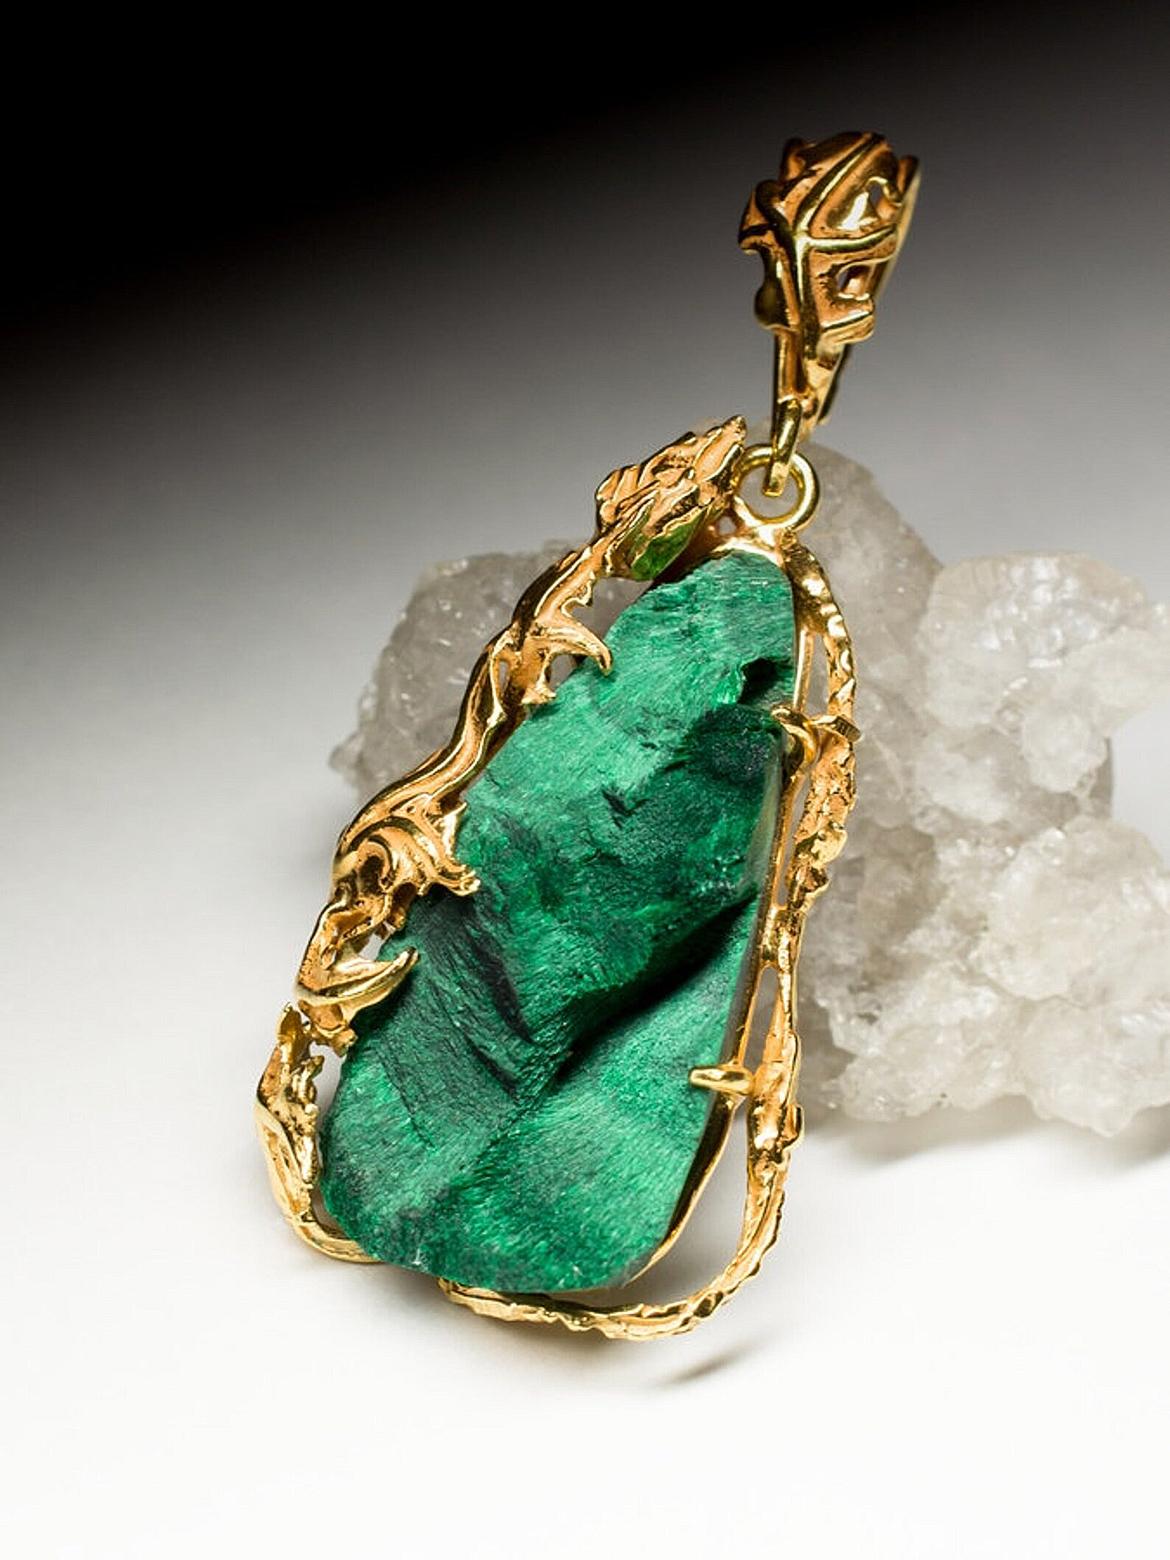 Art Nouveau style silver and 18K gold necklace with natural fiber Malachite 
gemstone origin - Congo
weight of the pendant - 12 grams
pendant height - 2.24 in / 57 mm
stone measurements - 0.24 х 0.59 x 1.38 in / 6 х 15 х 35 mm
ref No e-003